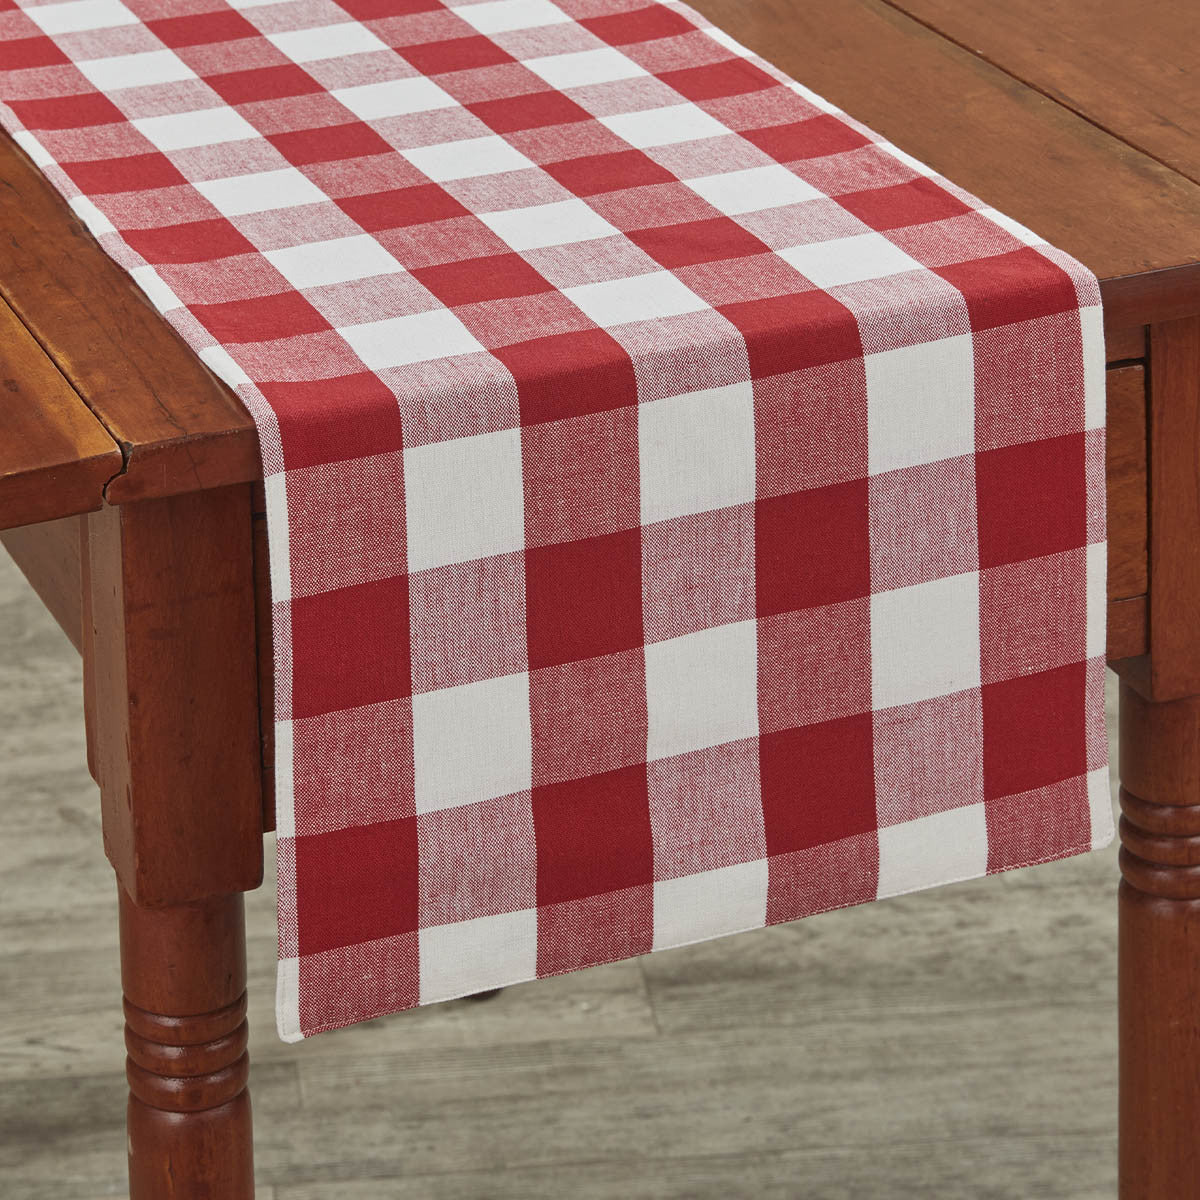 Wicklow Check Table Runners - Red & Cream Backed Park Designs